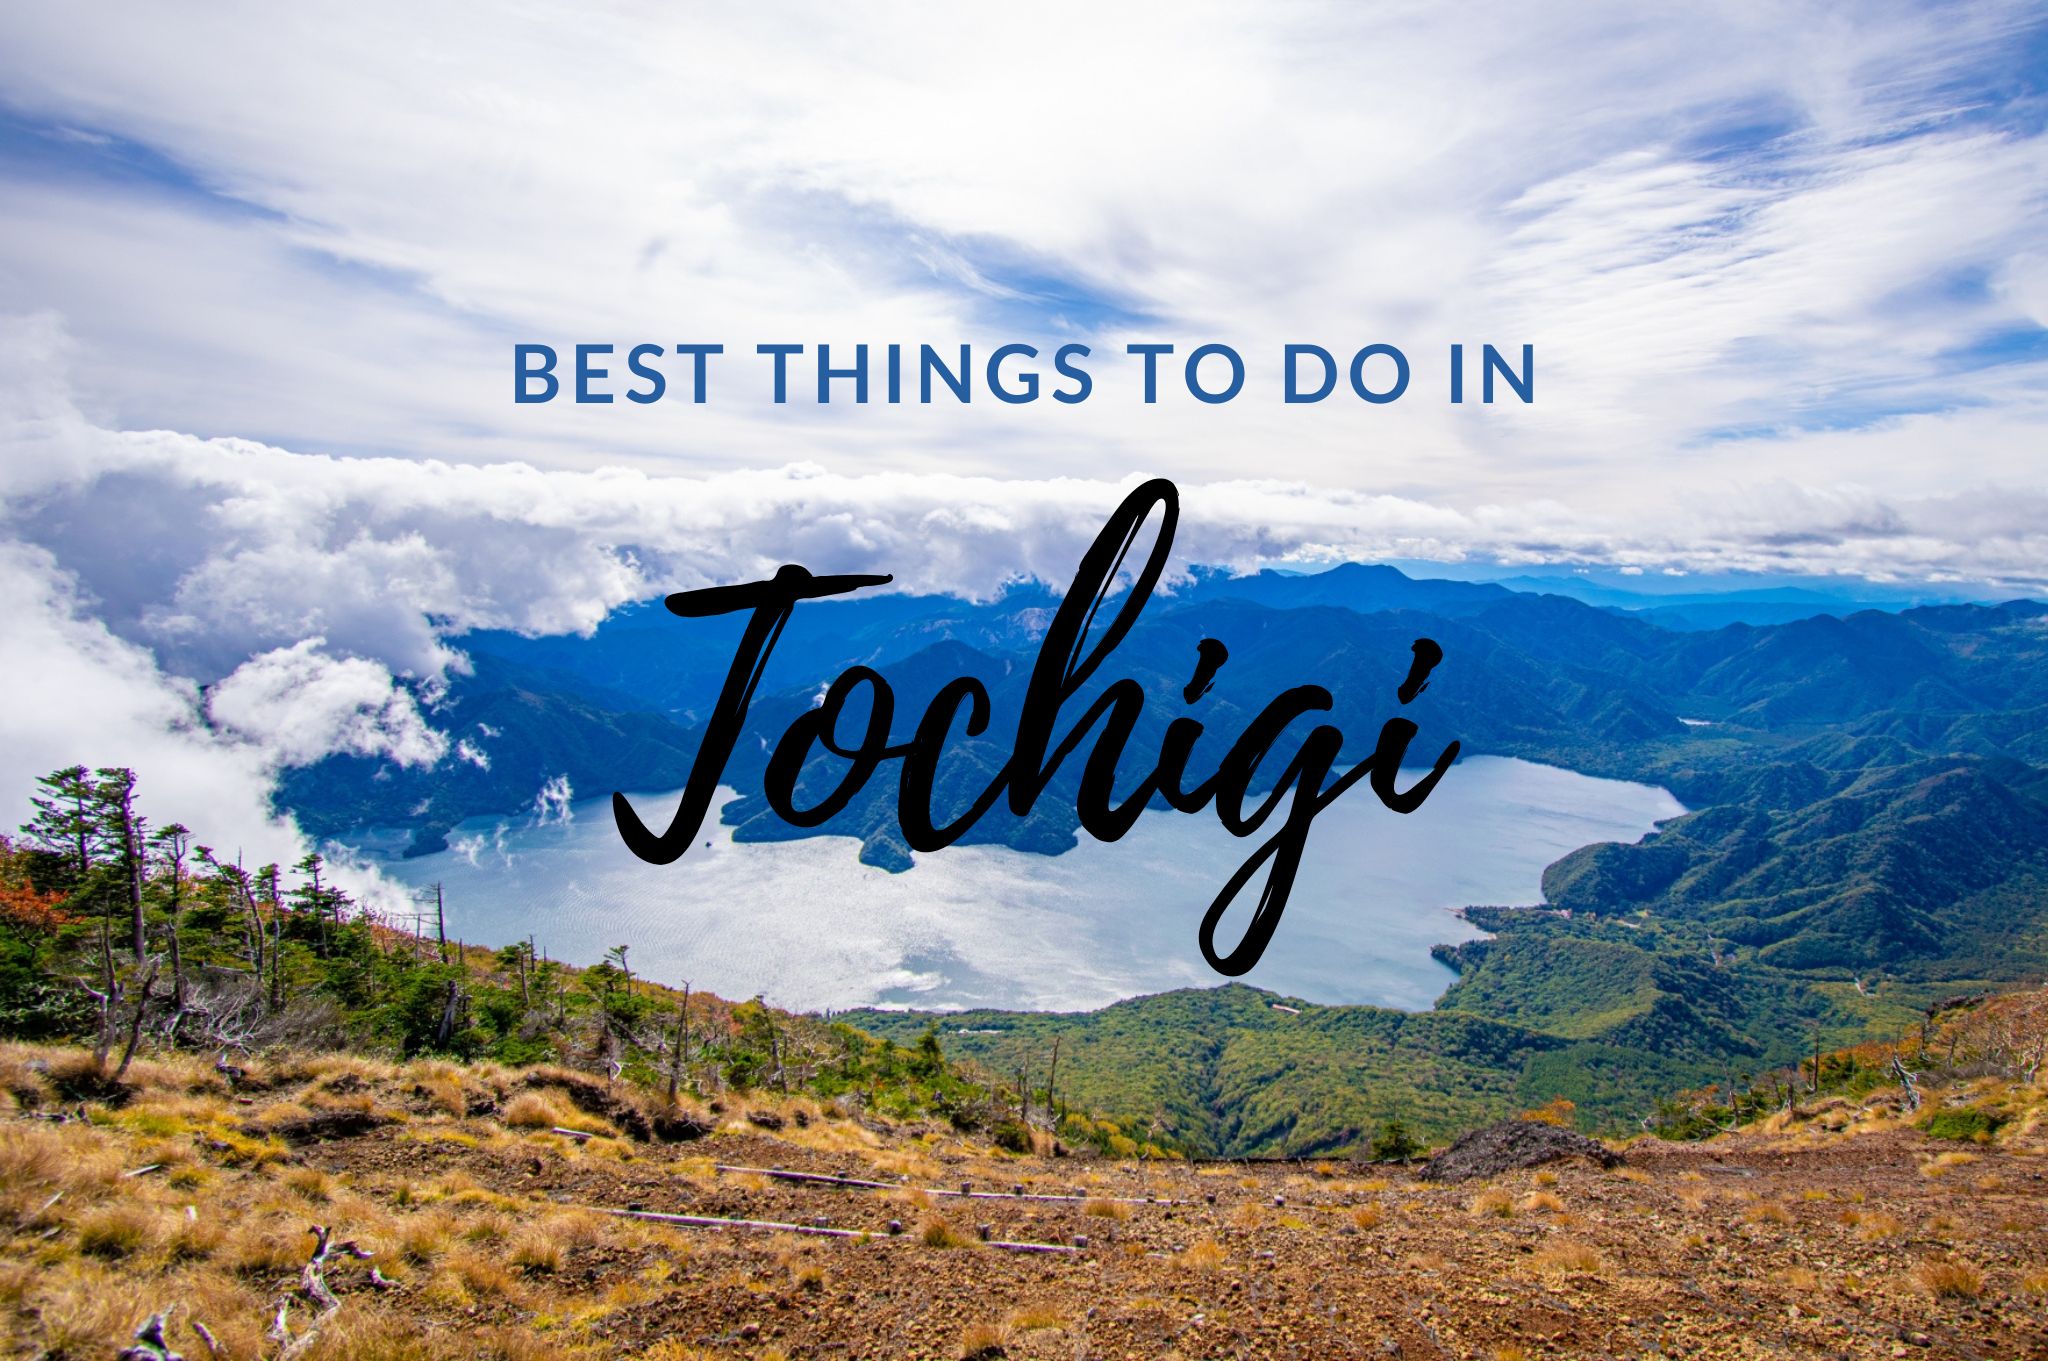 10 Best Things to Do in Tochigi